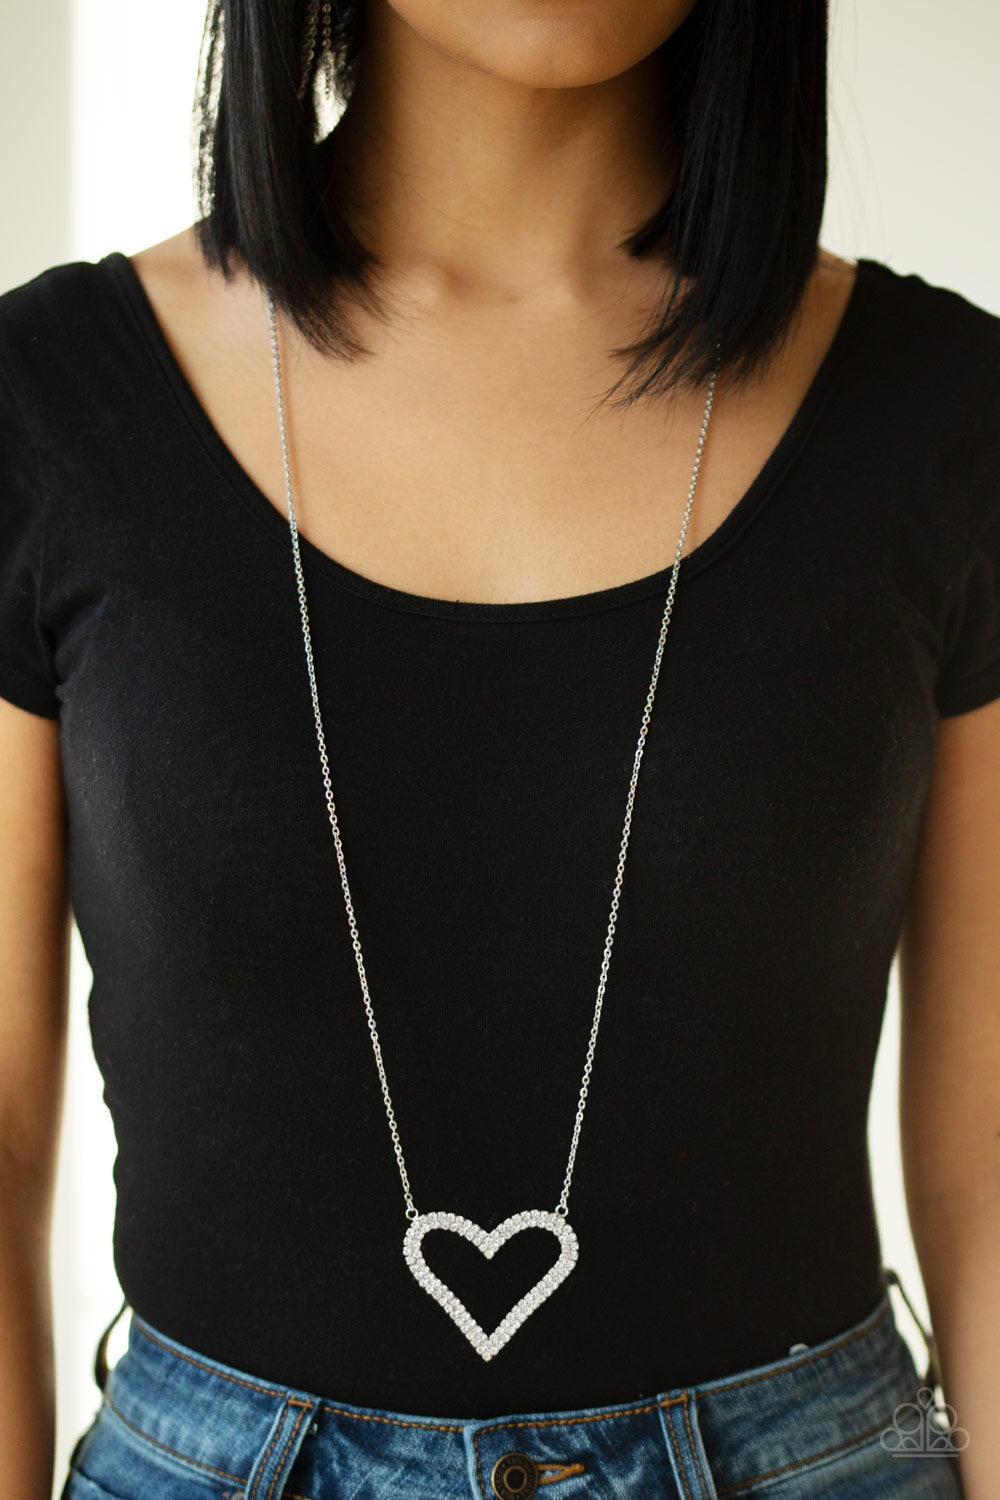 Pull Some HEART-strings - White Necklace